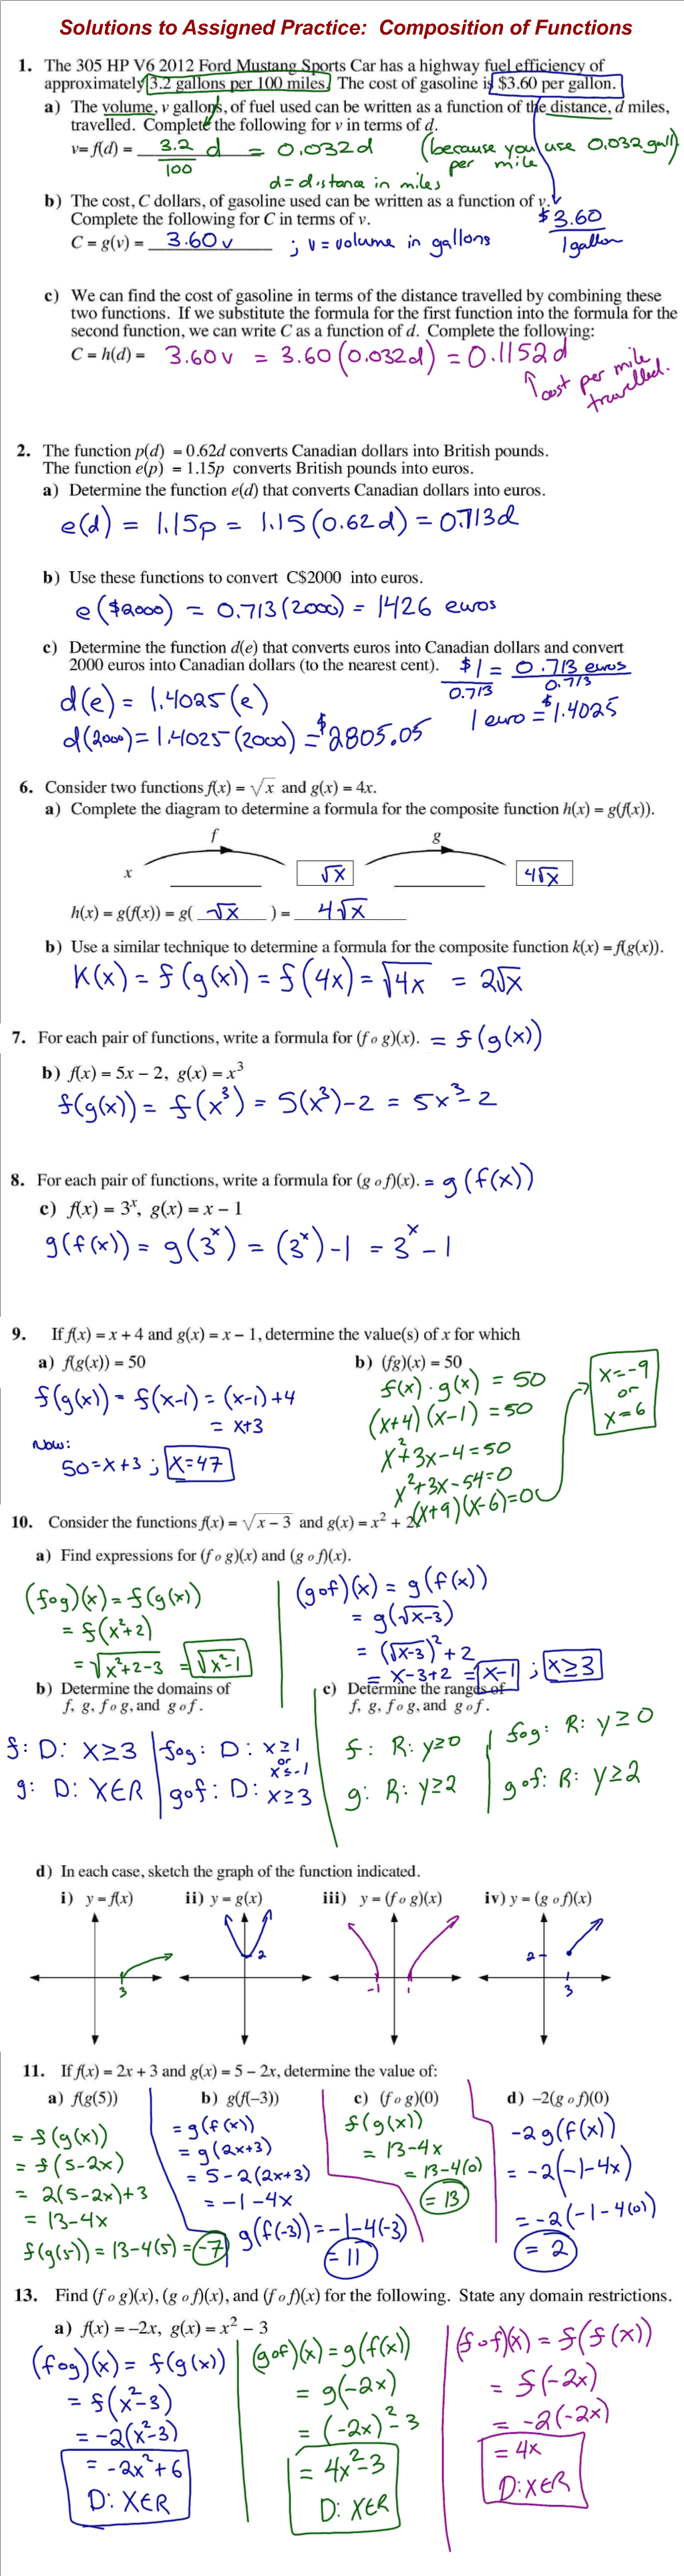 Composition of Functions - Mr. Zinnick